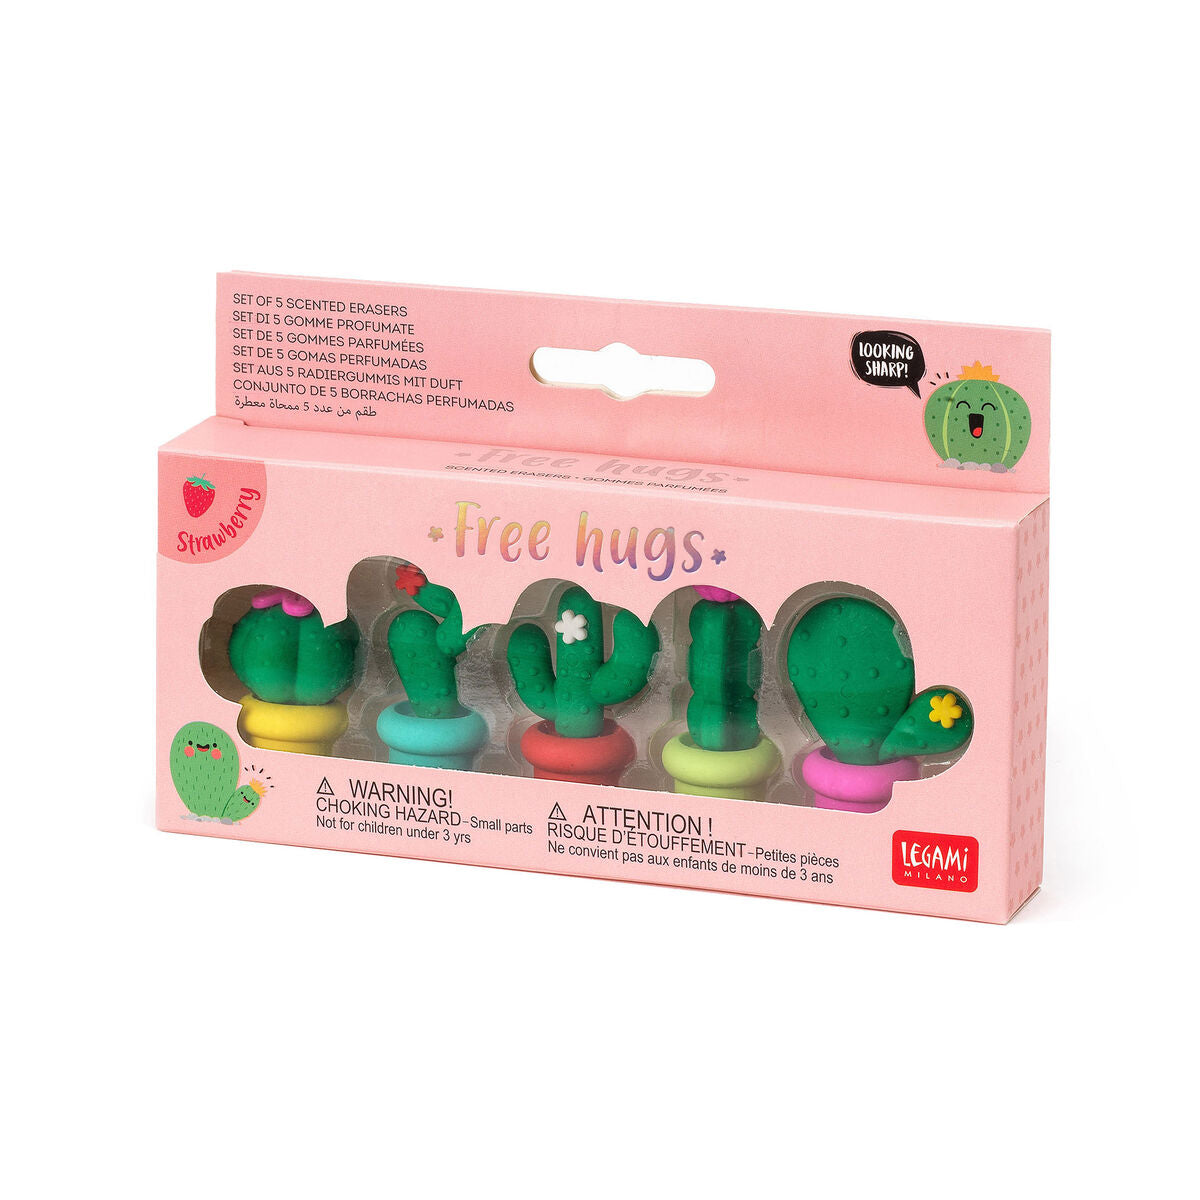 Fab Gifts | Legami Free Hugs Set Of 5 Cactus Erasers by Weirs of Baggot Street